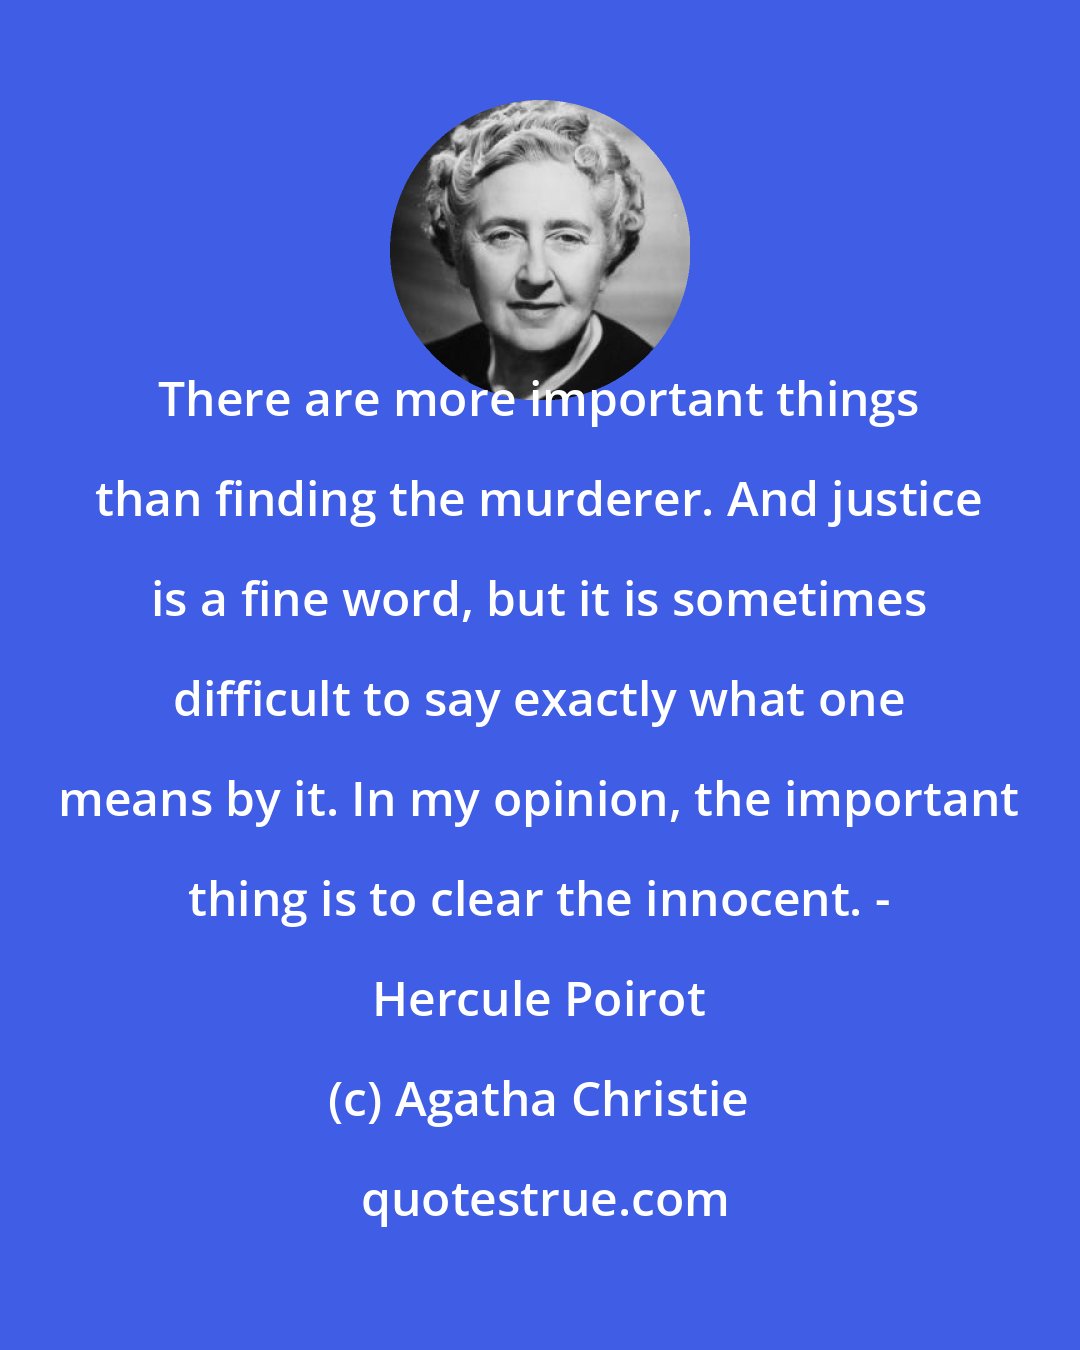 Agatha Christie: There are more important things than finding the murderer. And justice is a fine word, but it is sometimes difficult to say exactly what one means by it. In my opinion, the important thing is to clear the innocent. - Hercule Poirot